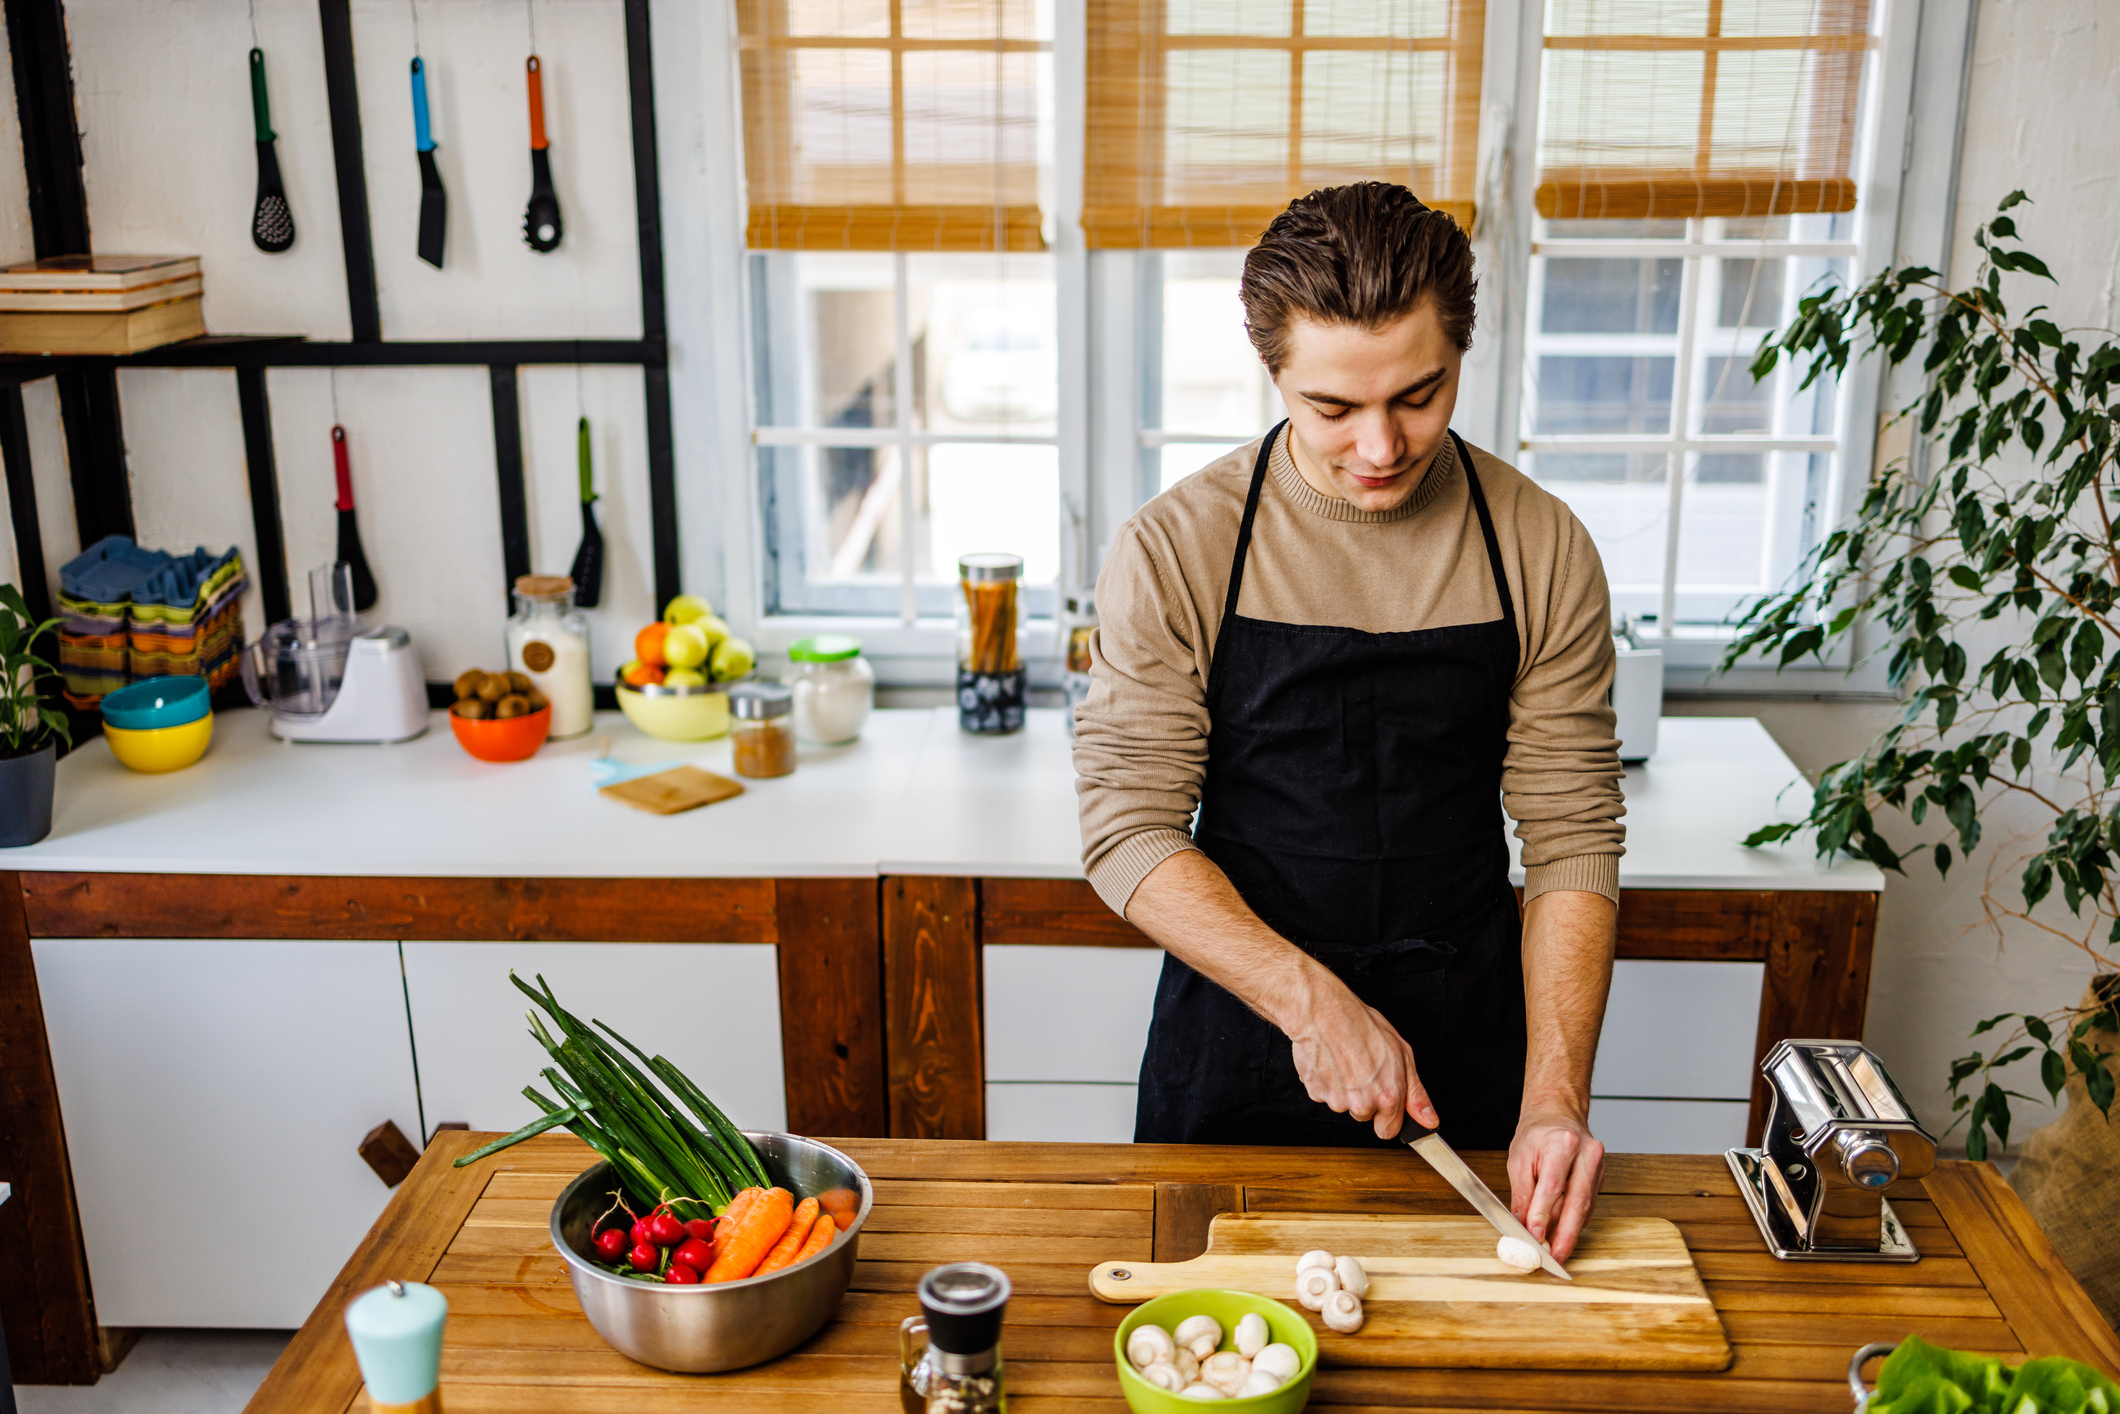 Man in apron chops vegetables on kitchen counter for meal prep